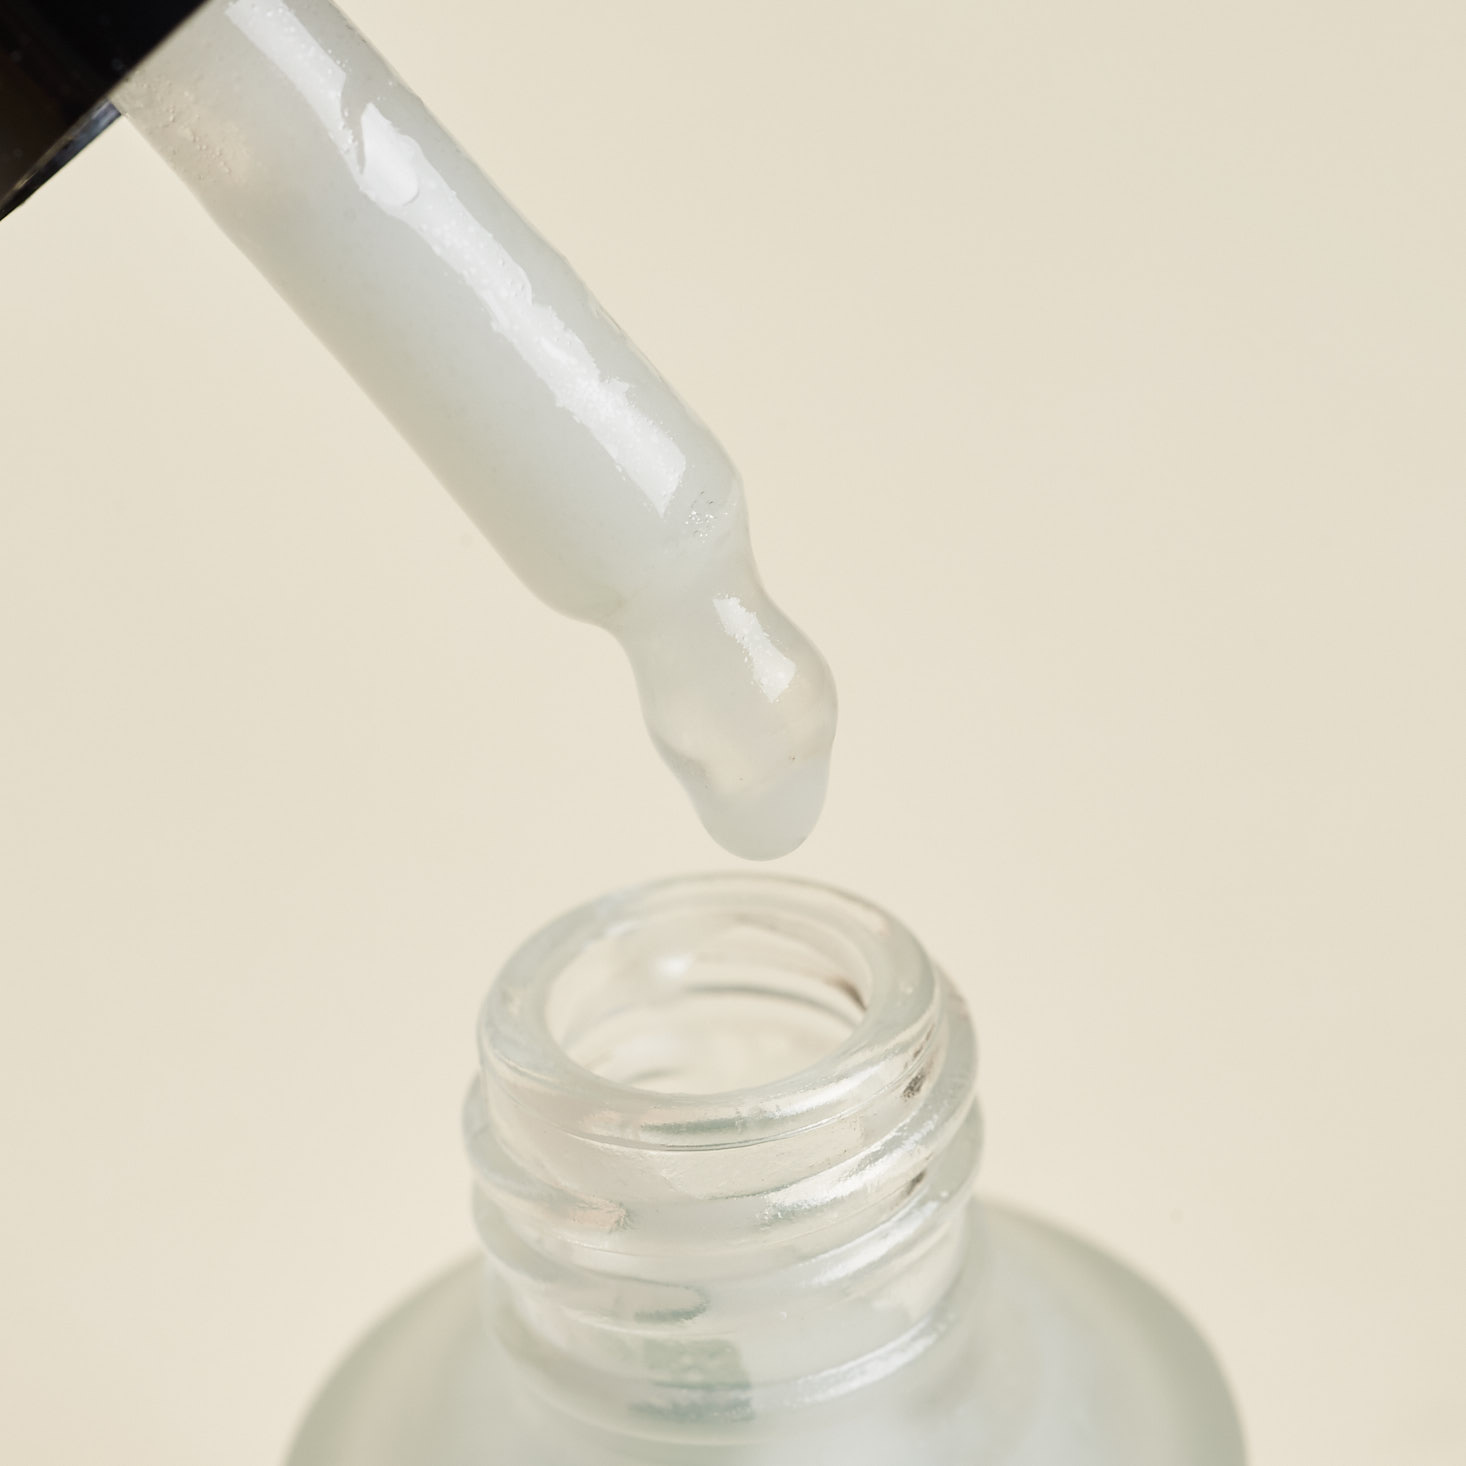 Terrene Beauty Azure Serum- close up of dropper with serum coming out